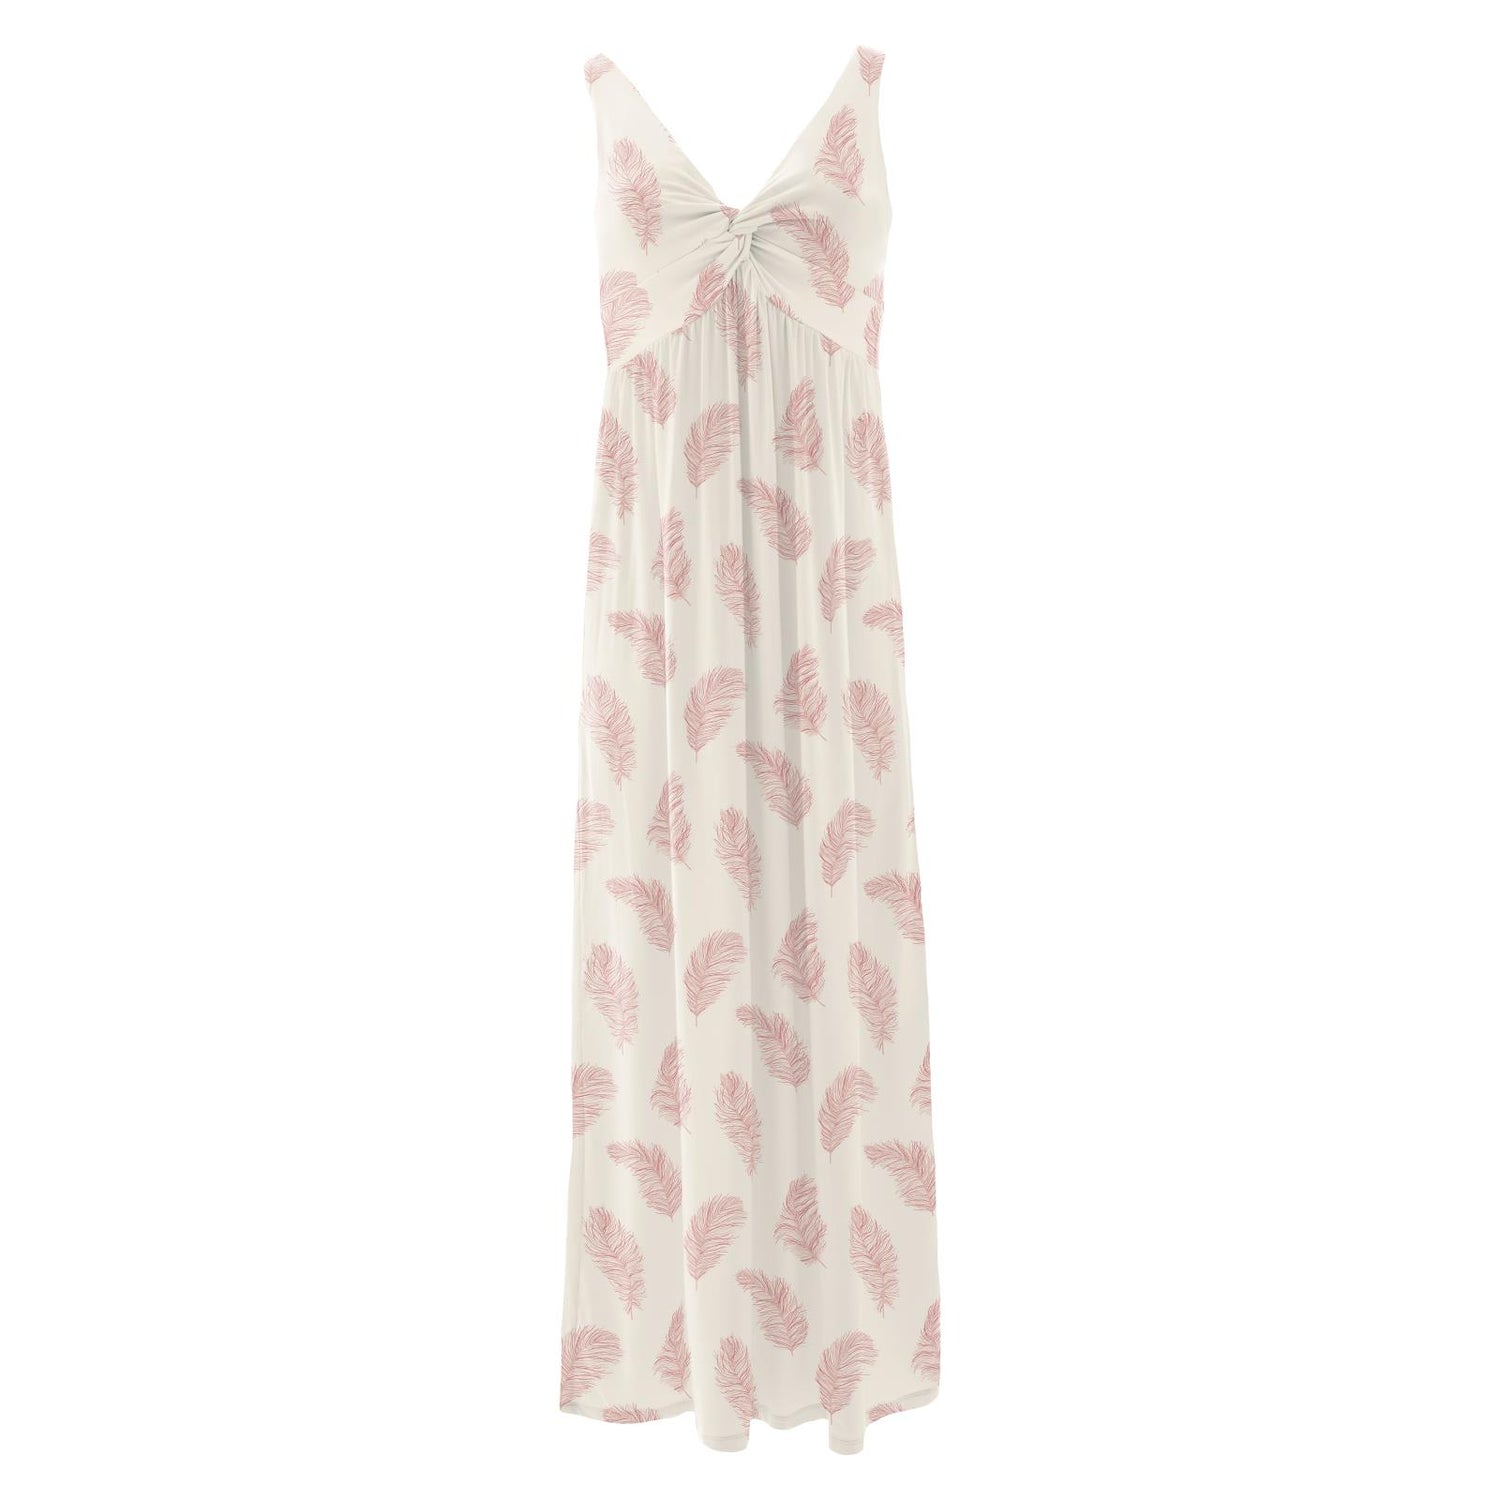 Women's Print Simple Twist Nightgown in Natural Feathers